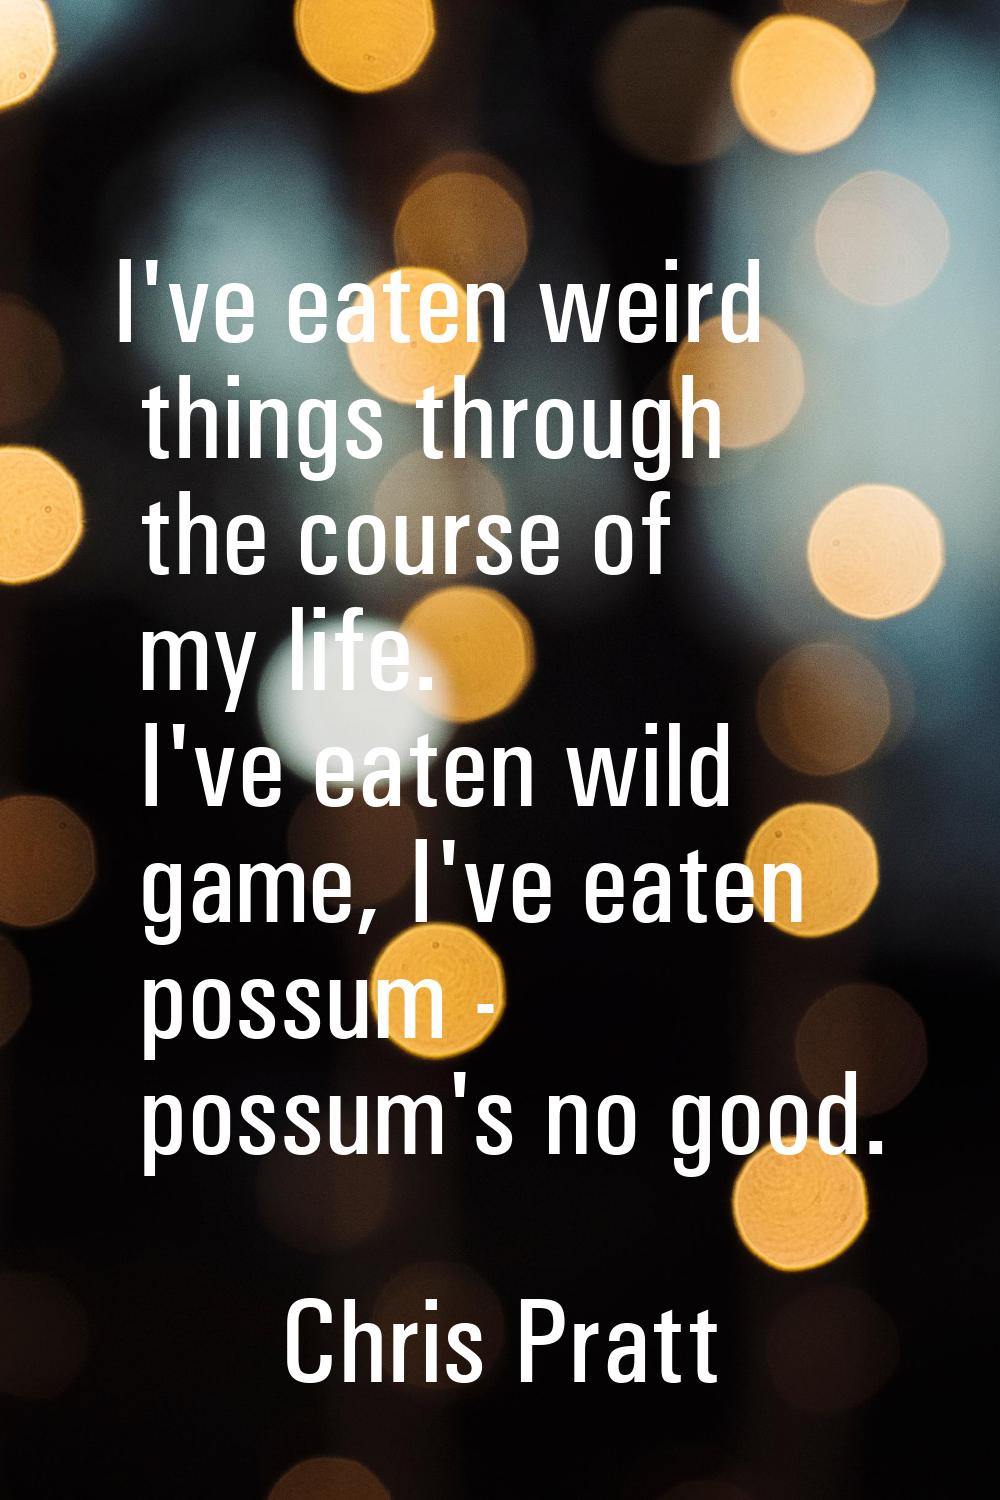 I've eaten weird things through the course of my life. I've eaten wild game, I've eaten possum - po